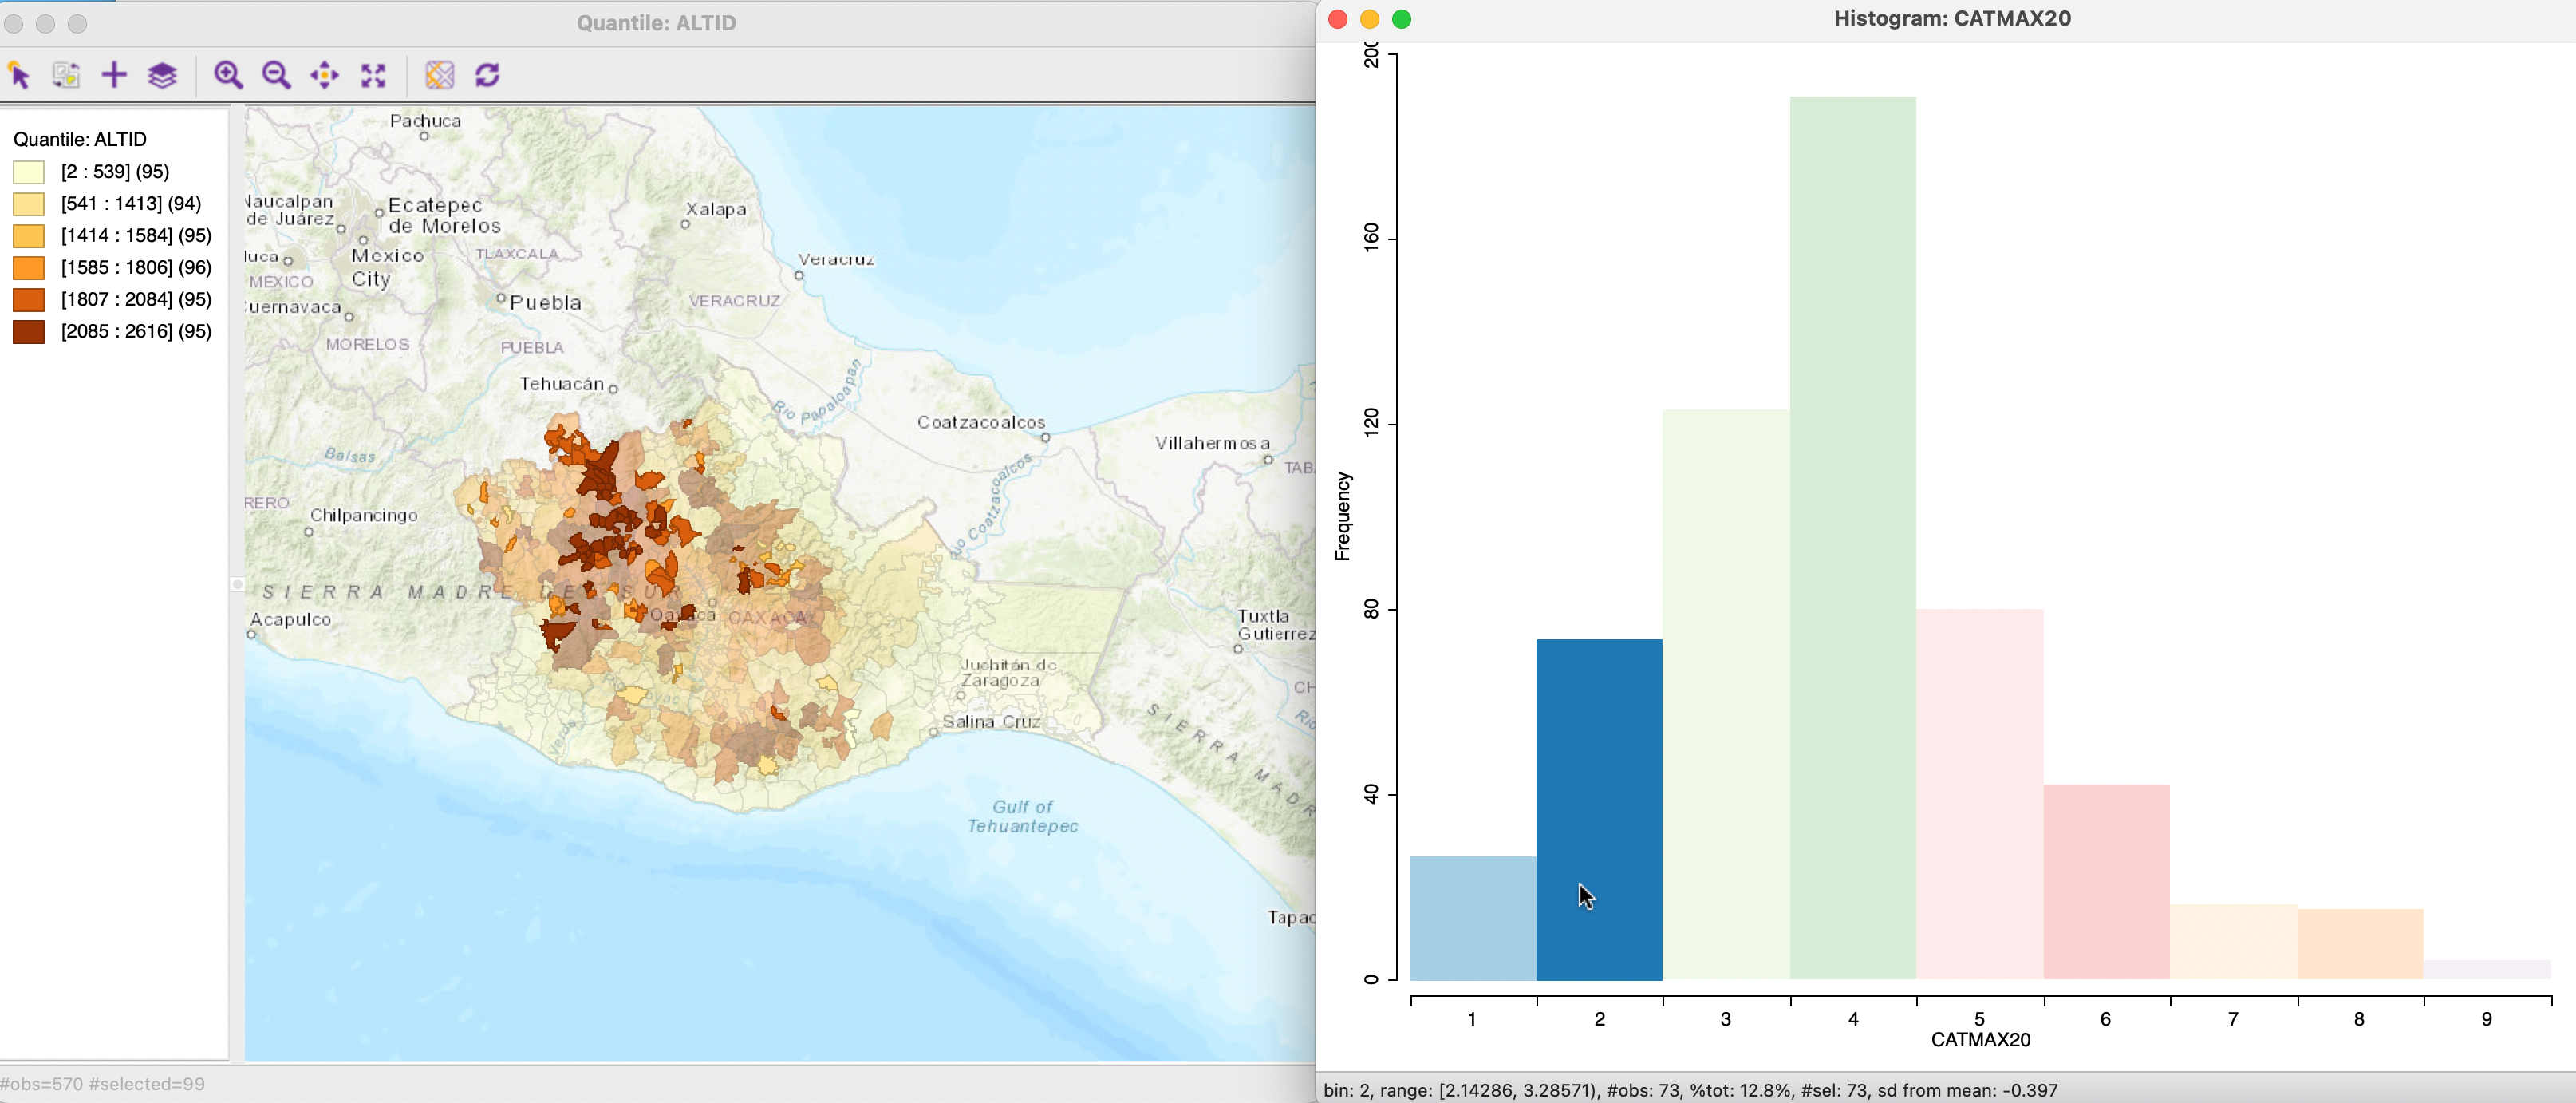 Linking between histogram and map